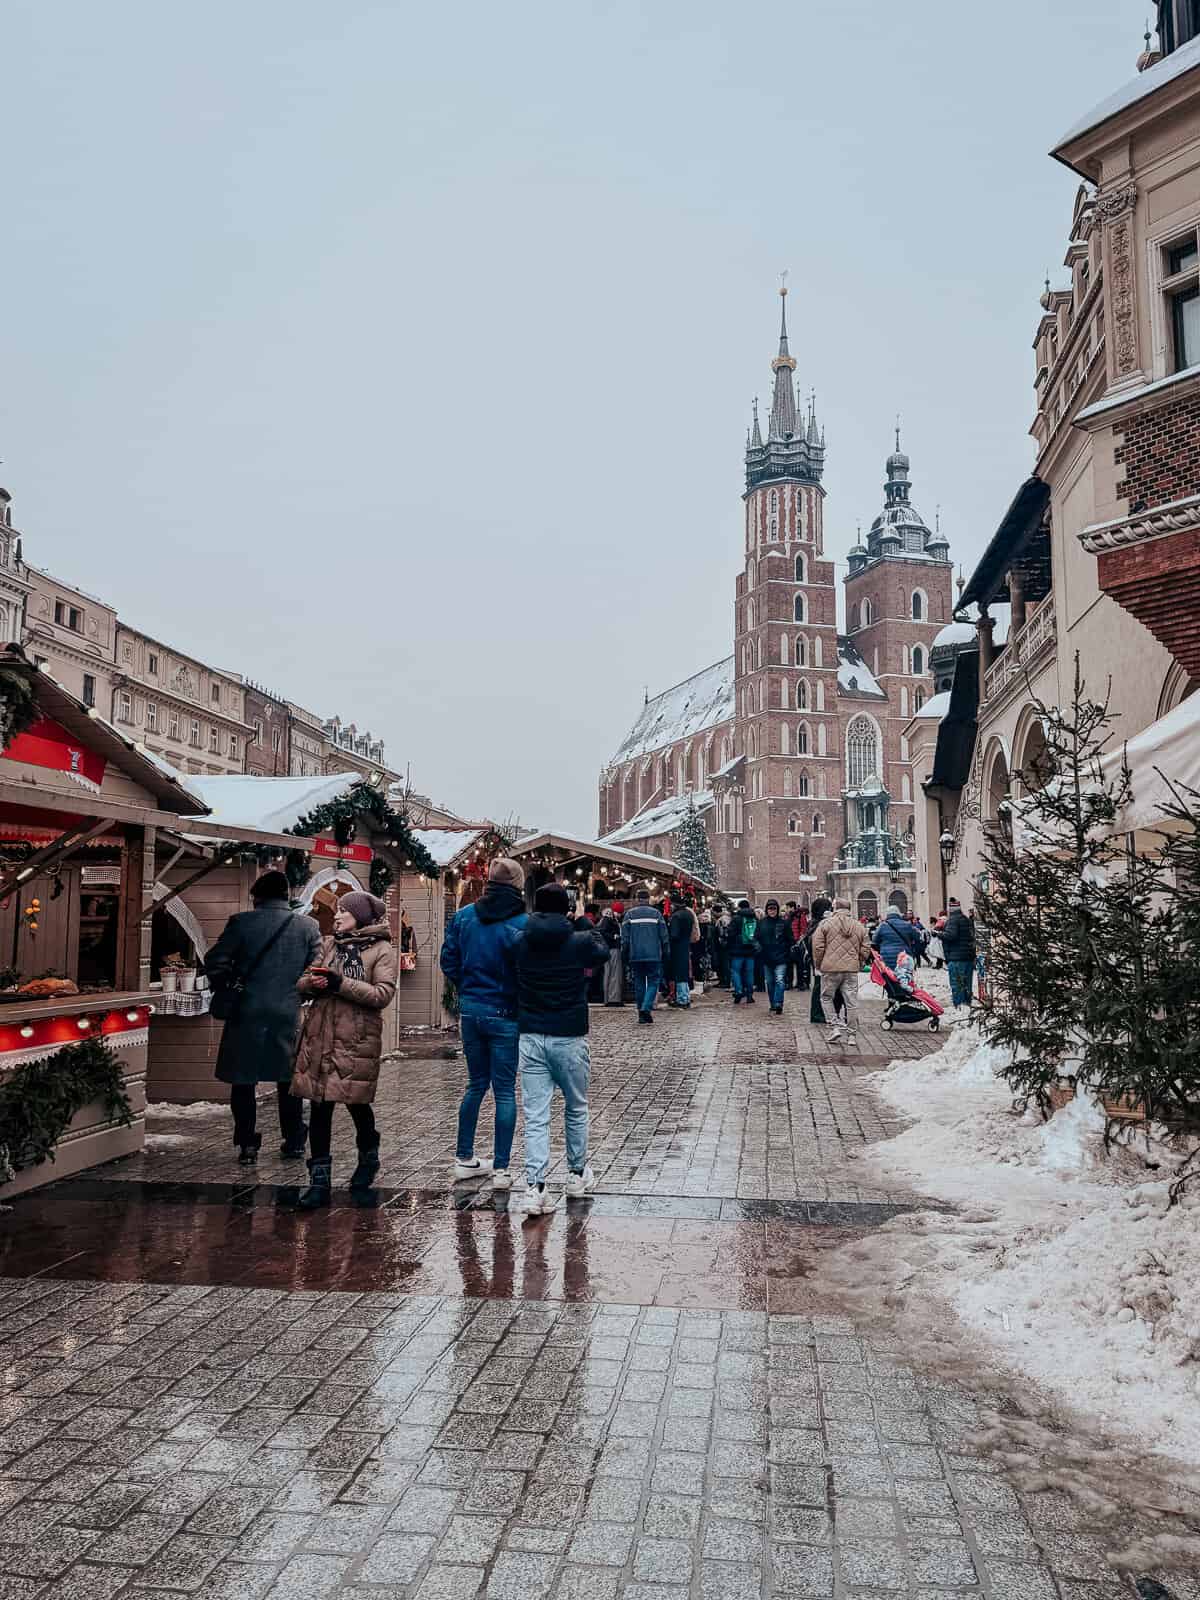 People walking through a snowy Christmas market street, with red-roofed stalls on either side selling holiday items, with the iconic red brick Gothic St. Mary's Basilica in the distance under a gray sky.